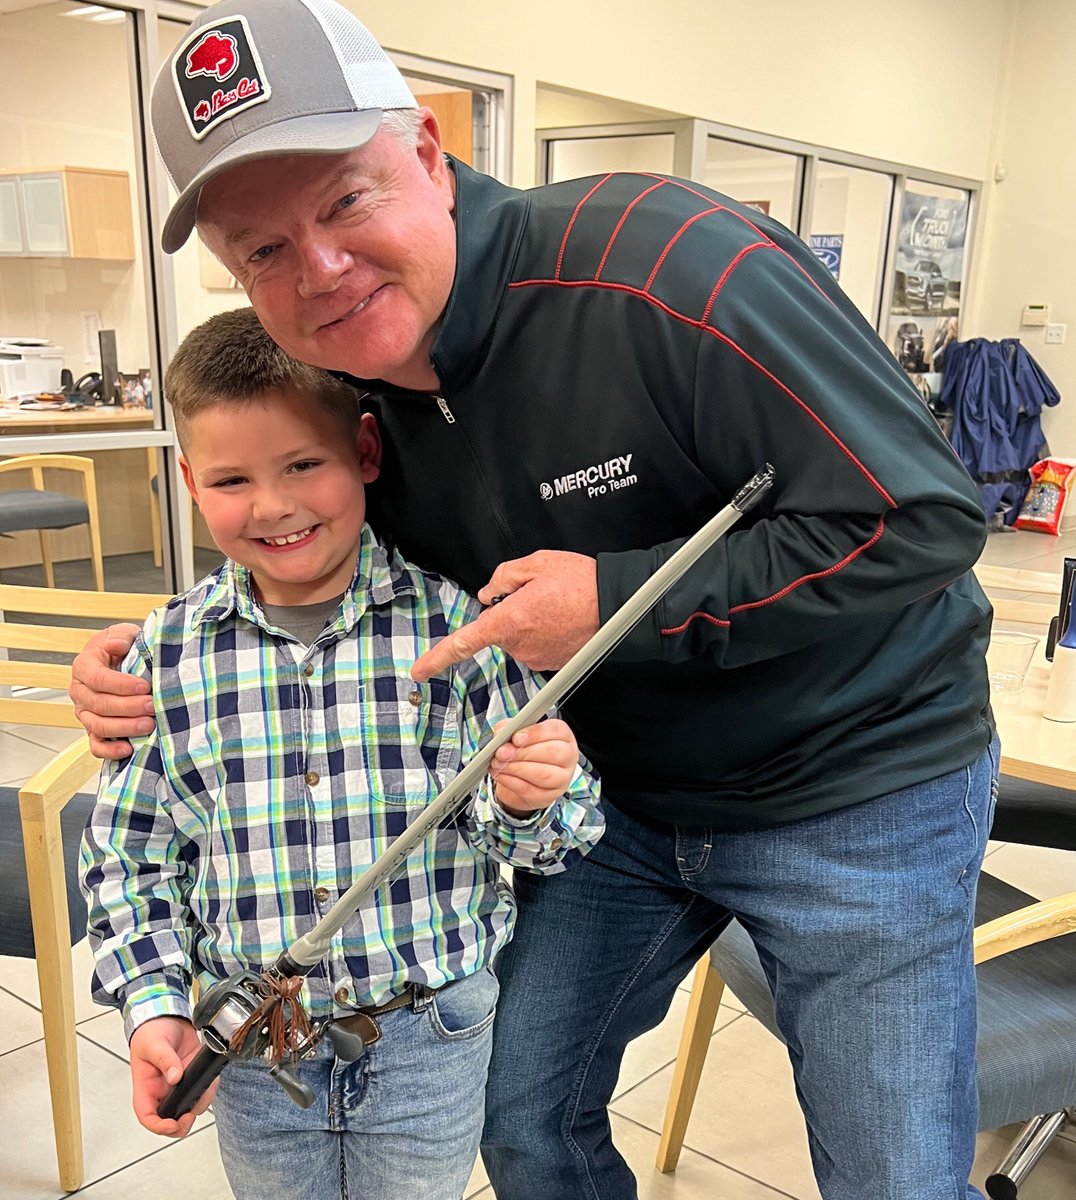 I’ve met some some great people and seen some cool things in my travels. Like this little fella who made a fishing rod out of a toy sword. Worked great with his @Lews_Fishing reel taped to it! #teamlews